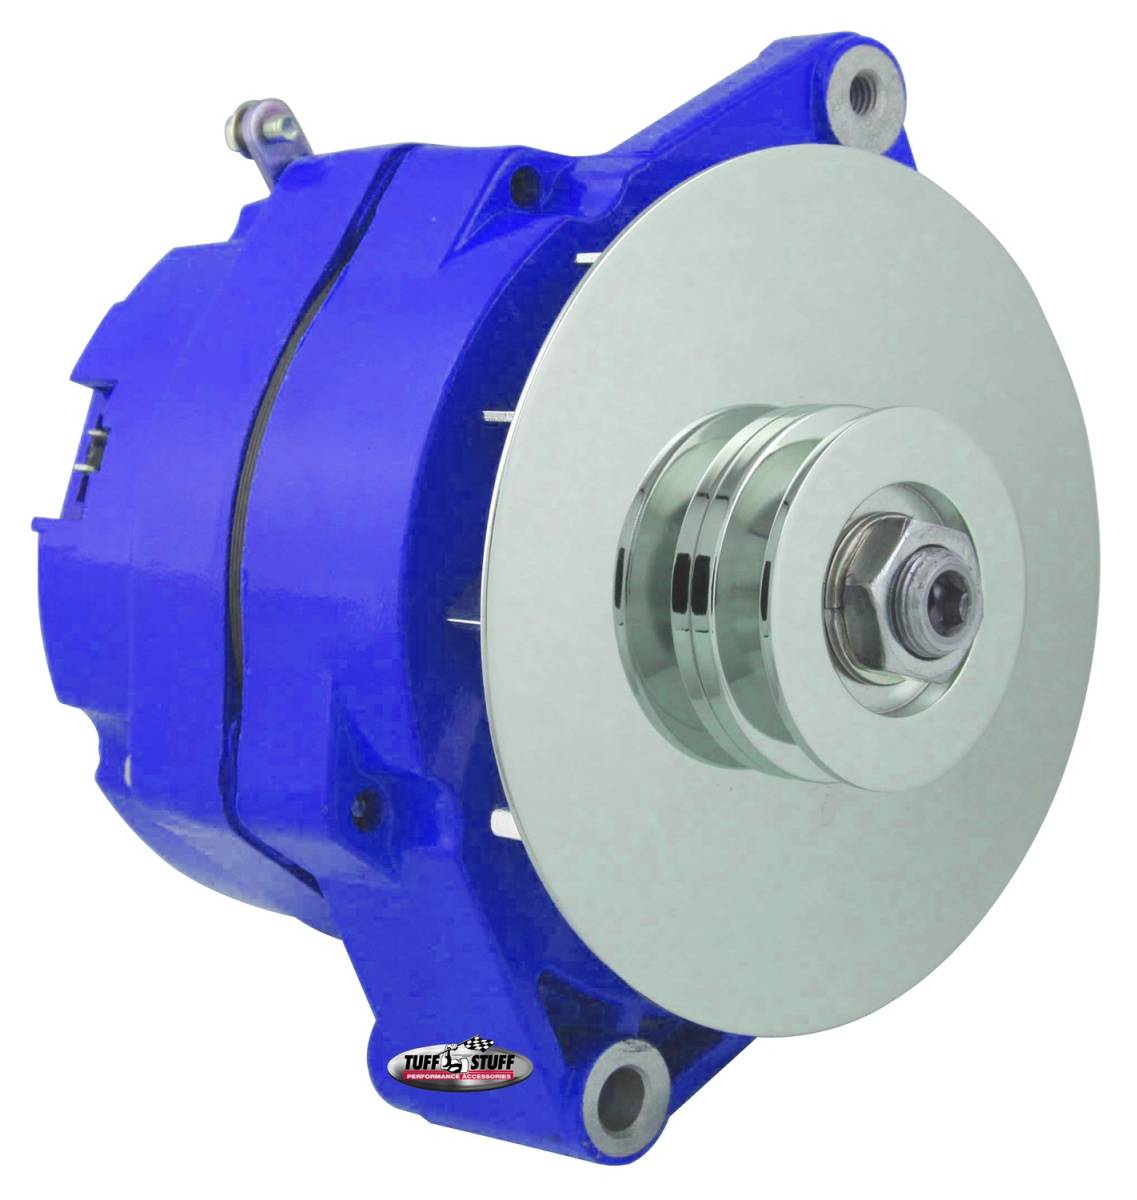 Tuff Stuff Performance - Alternator 80 AMP OEM Wire 10si Case V Groove Pulley External Regulator Blue Powdercoat w/Chrome Accents Must Be Used With An External Solid State Voltage Regulator 7102NFBLUE